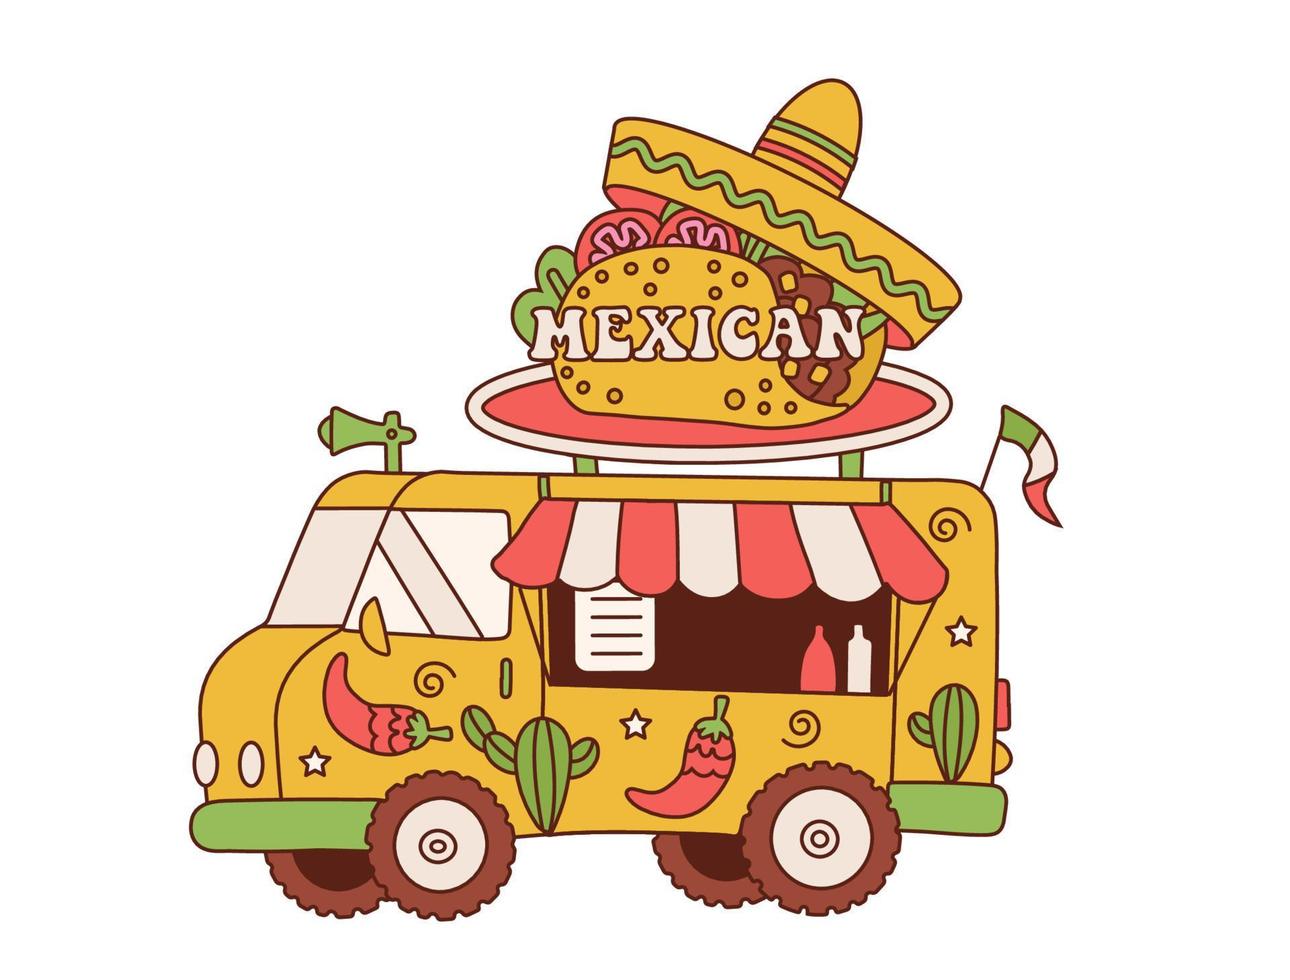 Retro Delicious Commercial Food Truck Vehicle with Mexican cuisine. Vehicle with Mexican hat and taco on the roof. Market in street vector illustration in retro cartoon style.